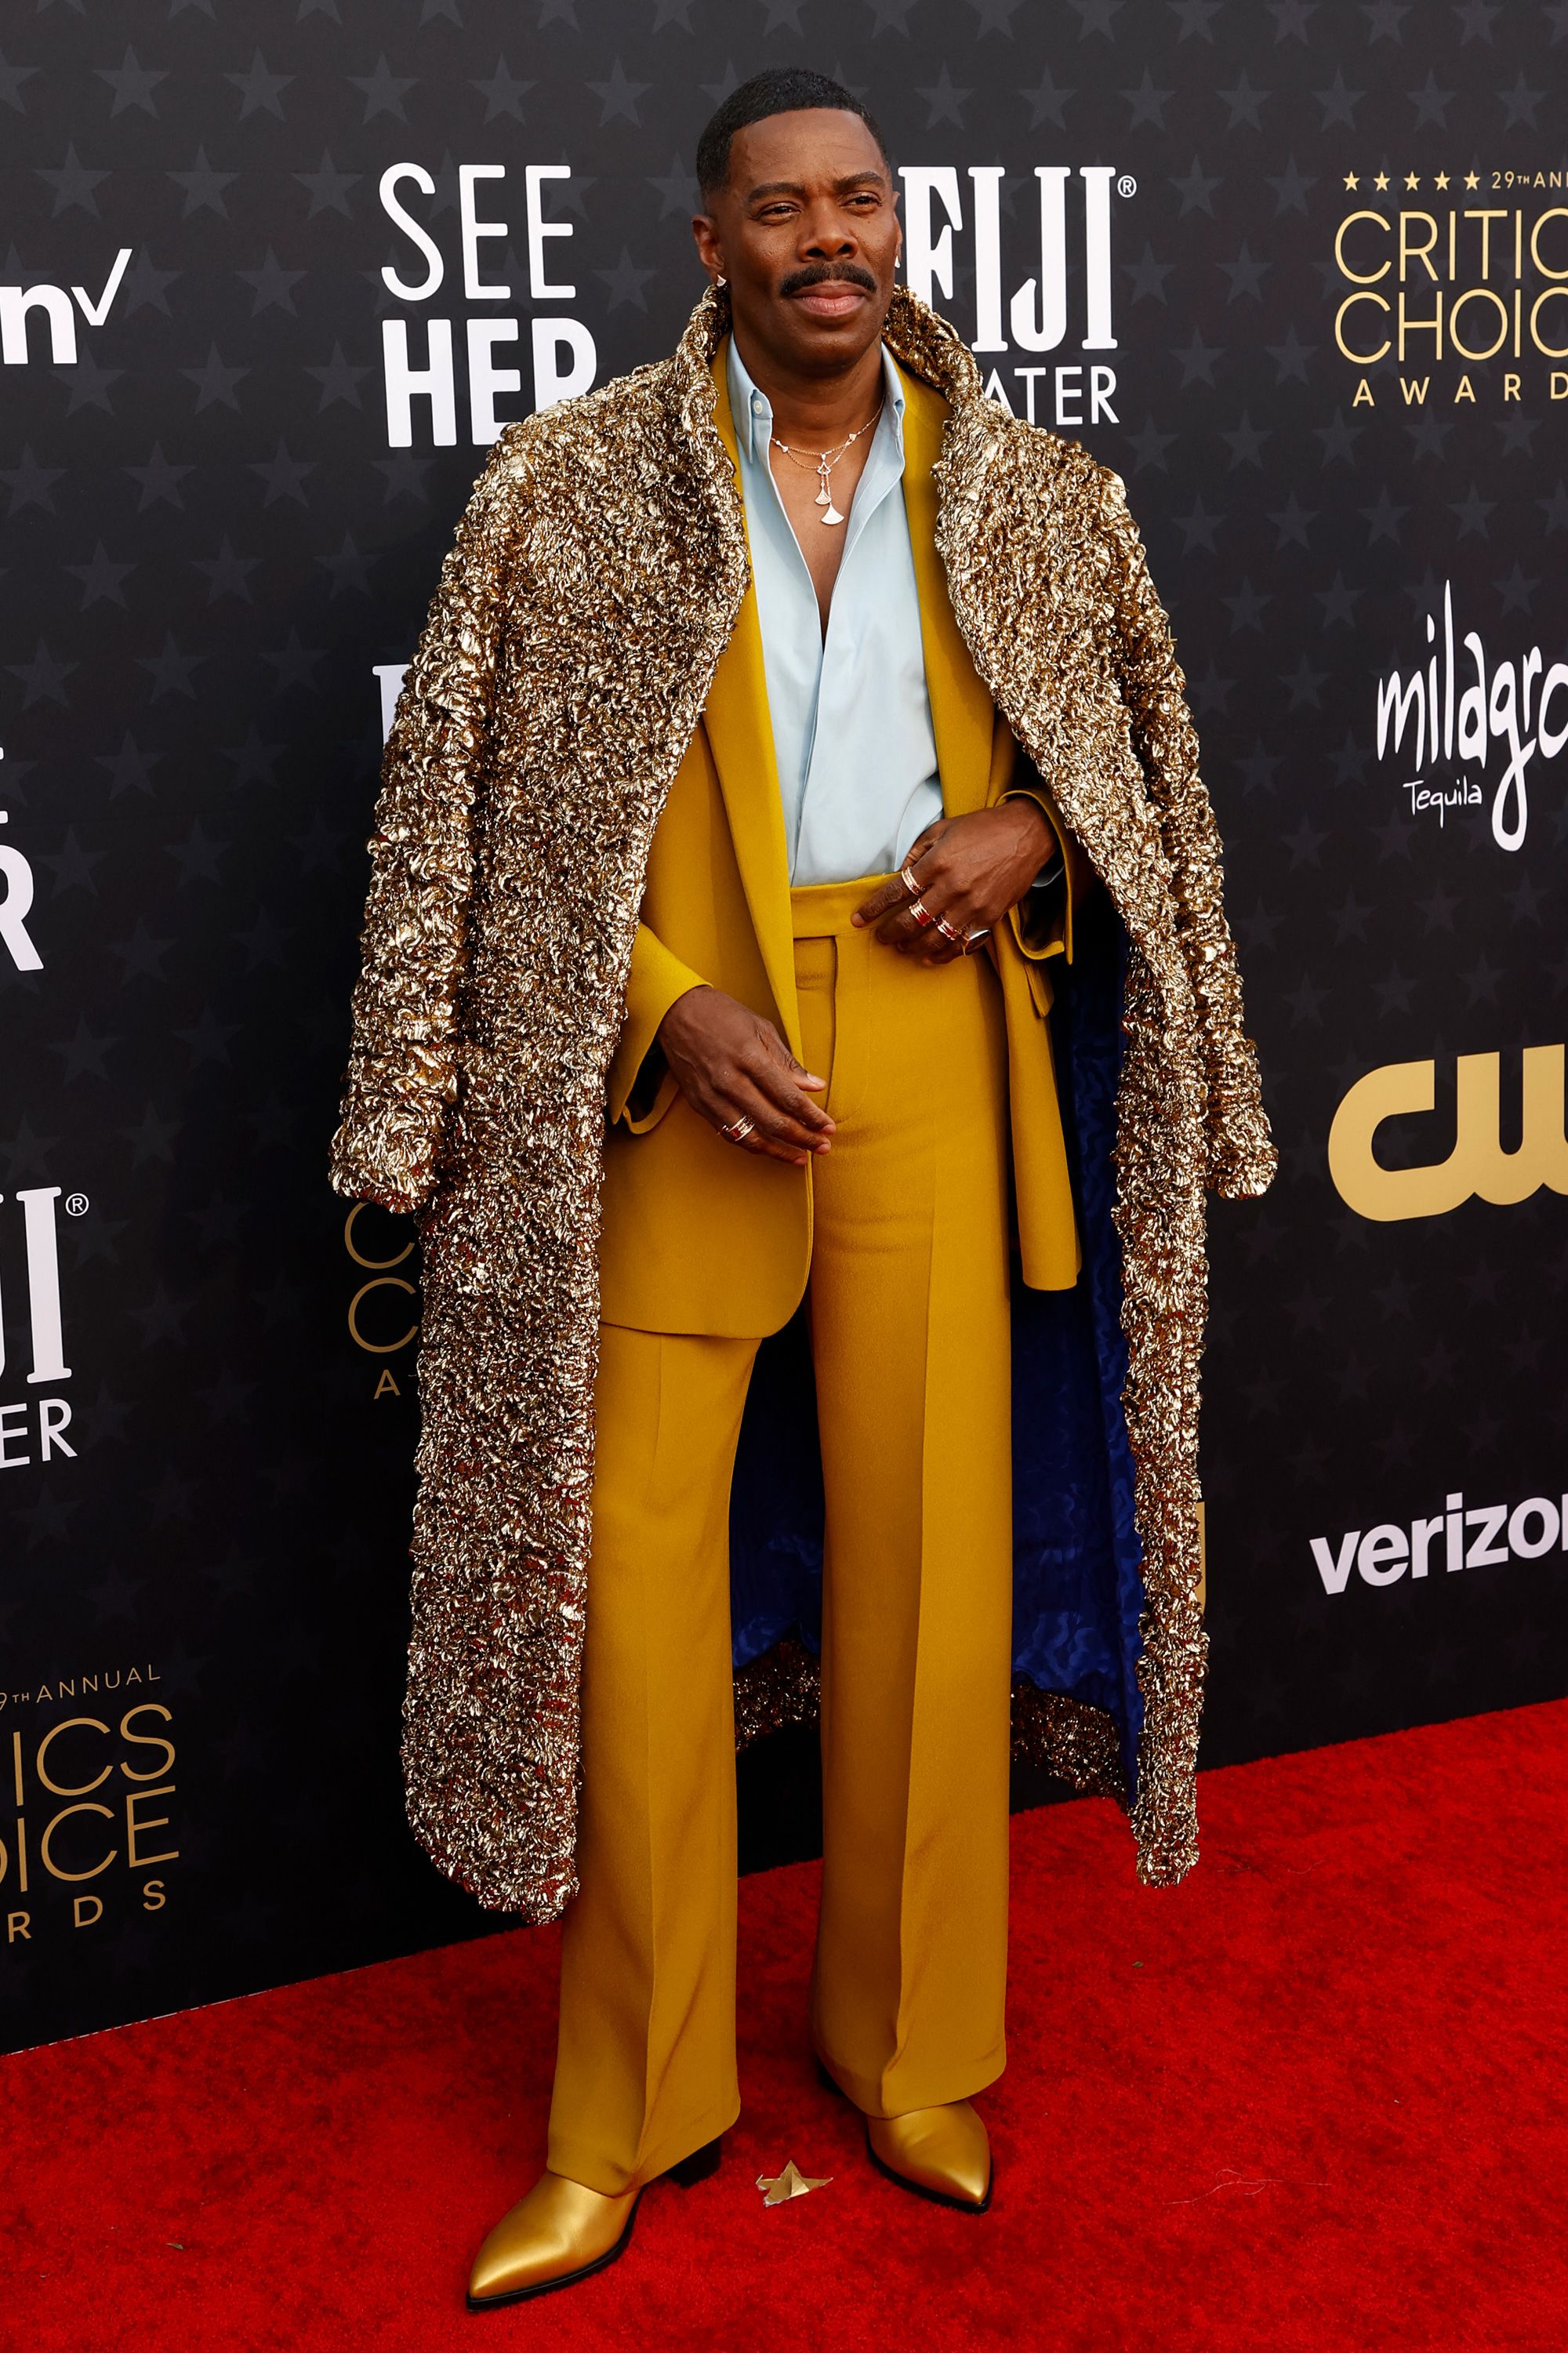 Colman Domingo, nominated for his performance in "Rustin," wore a custom Valentino outfit featuring a mustard suit with a golden overcoat and matching shoes. “I have a sense of play,” he said during the red carpet preshow. “I’m not always playing dark characters.”